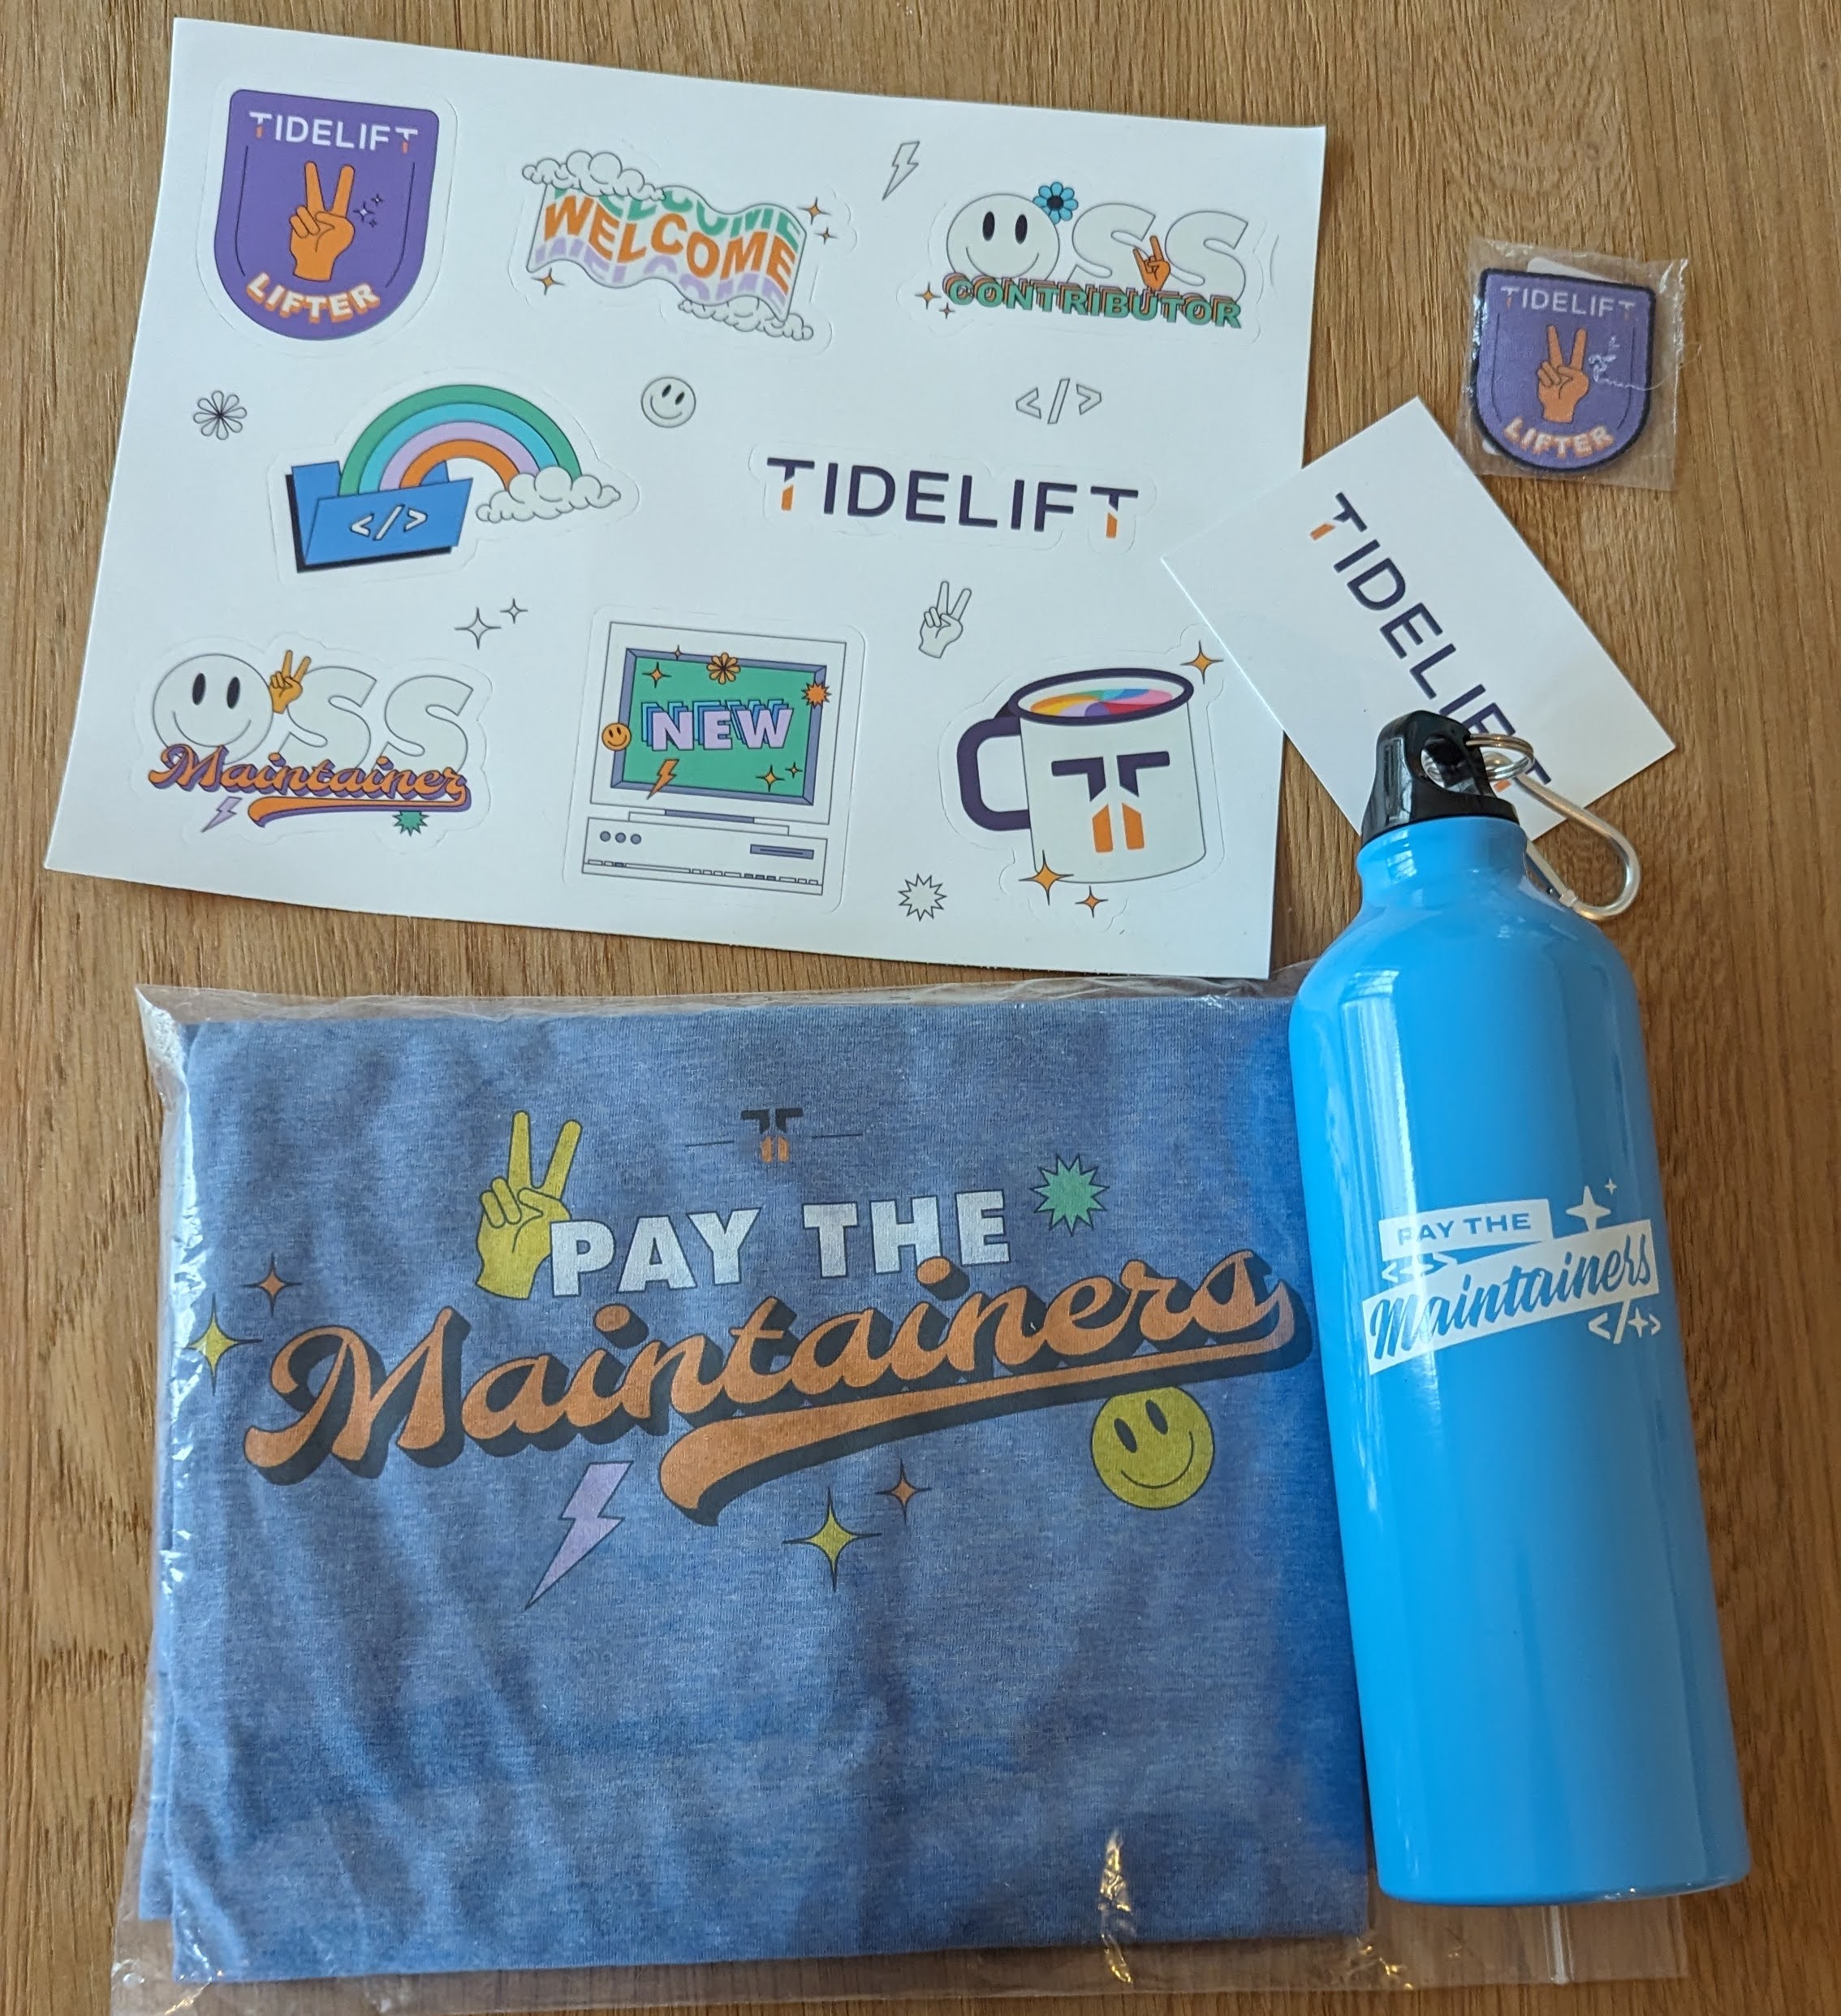 A t-shirt with "pay the maintainers", some cute emoji and the Tidelift logo, a "pay the maintainers" water bottle, a "Tidelift lifter" patch to sew onto i.e. a jacket, and a book of various Tidelift stickers, which all look really great!